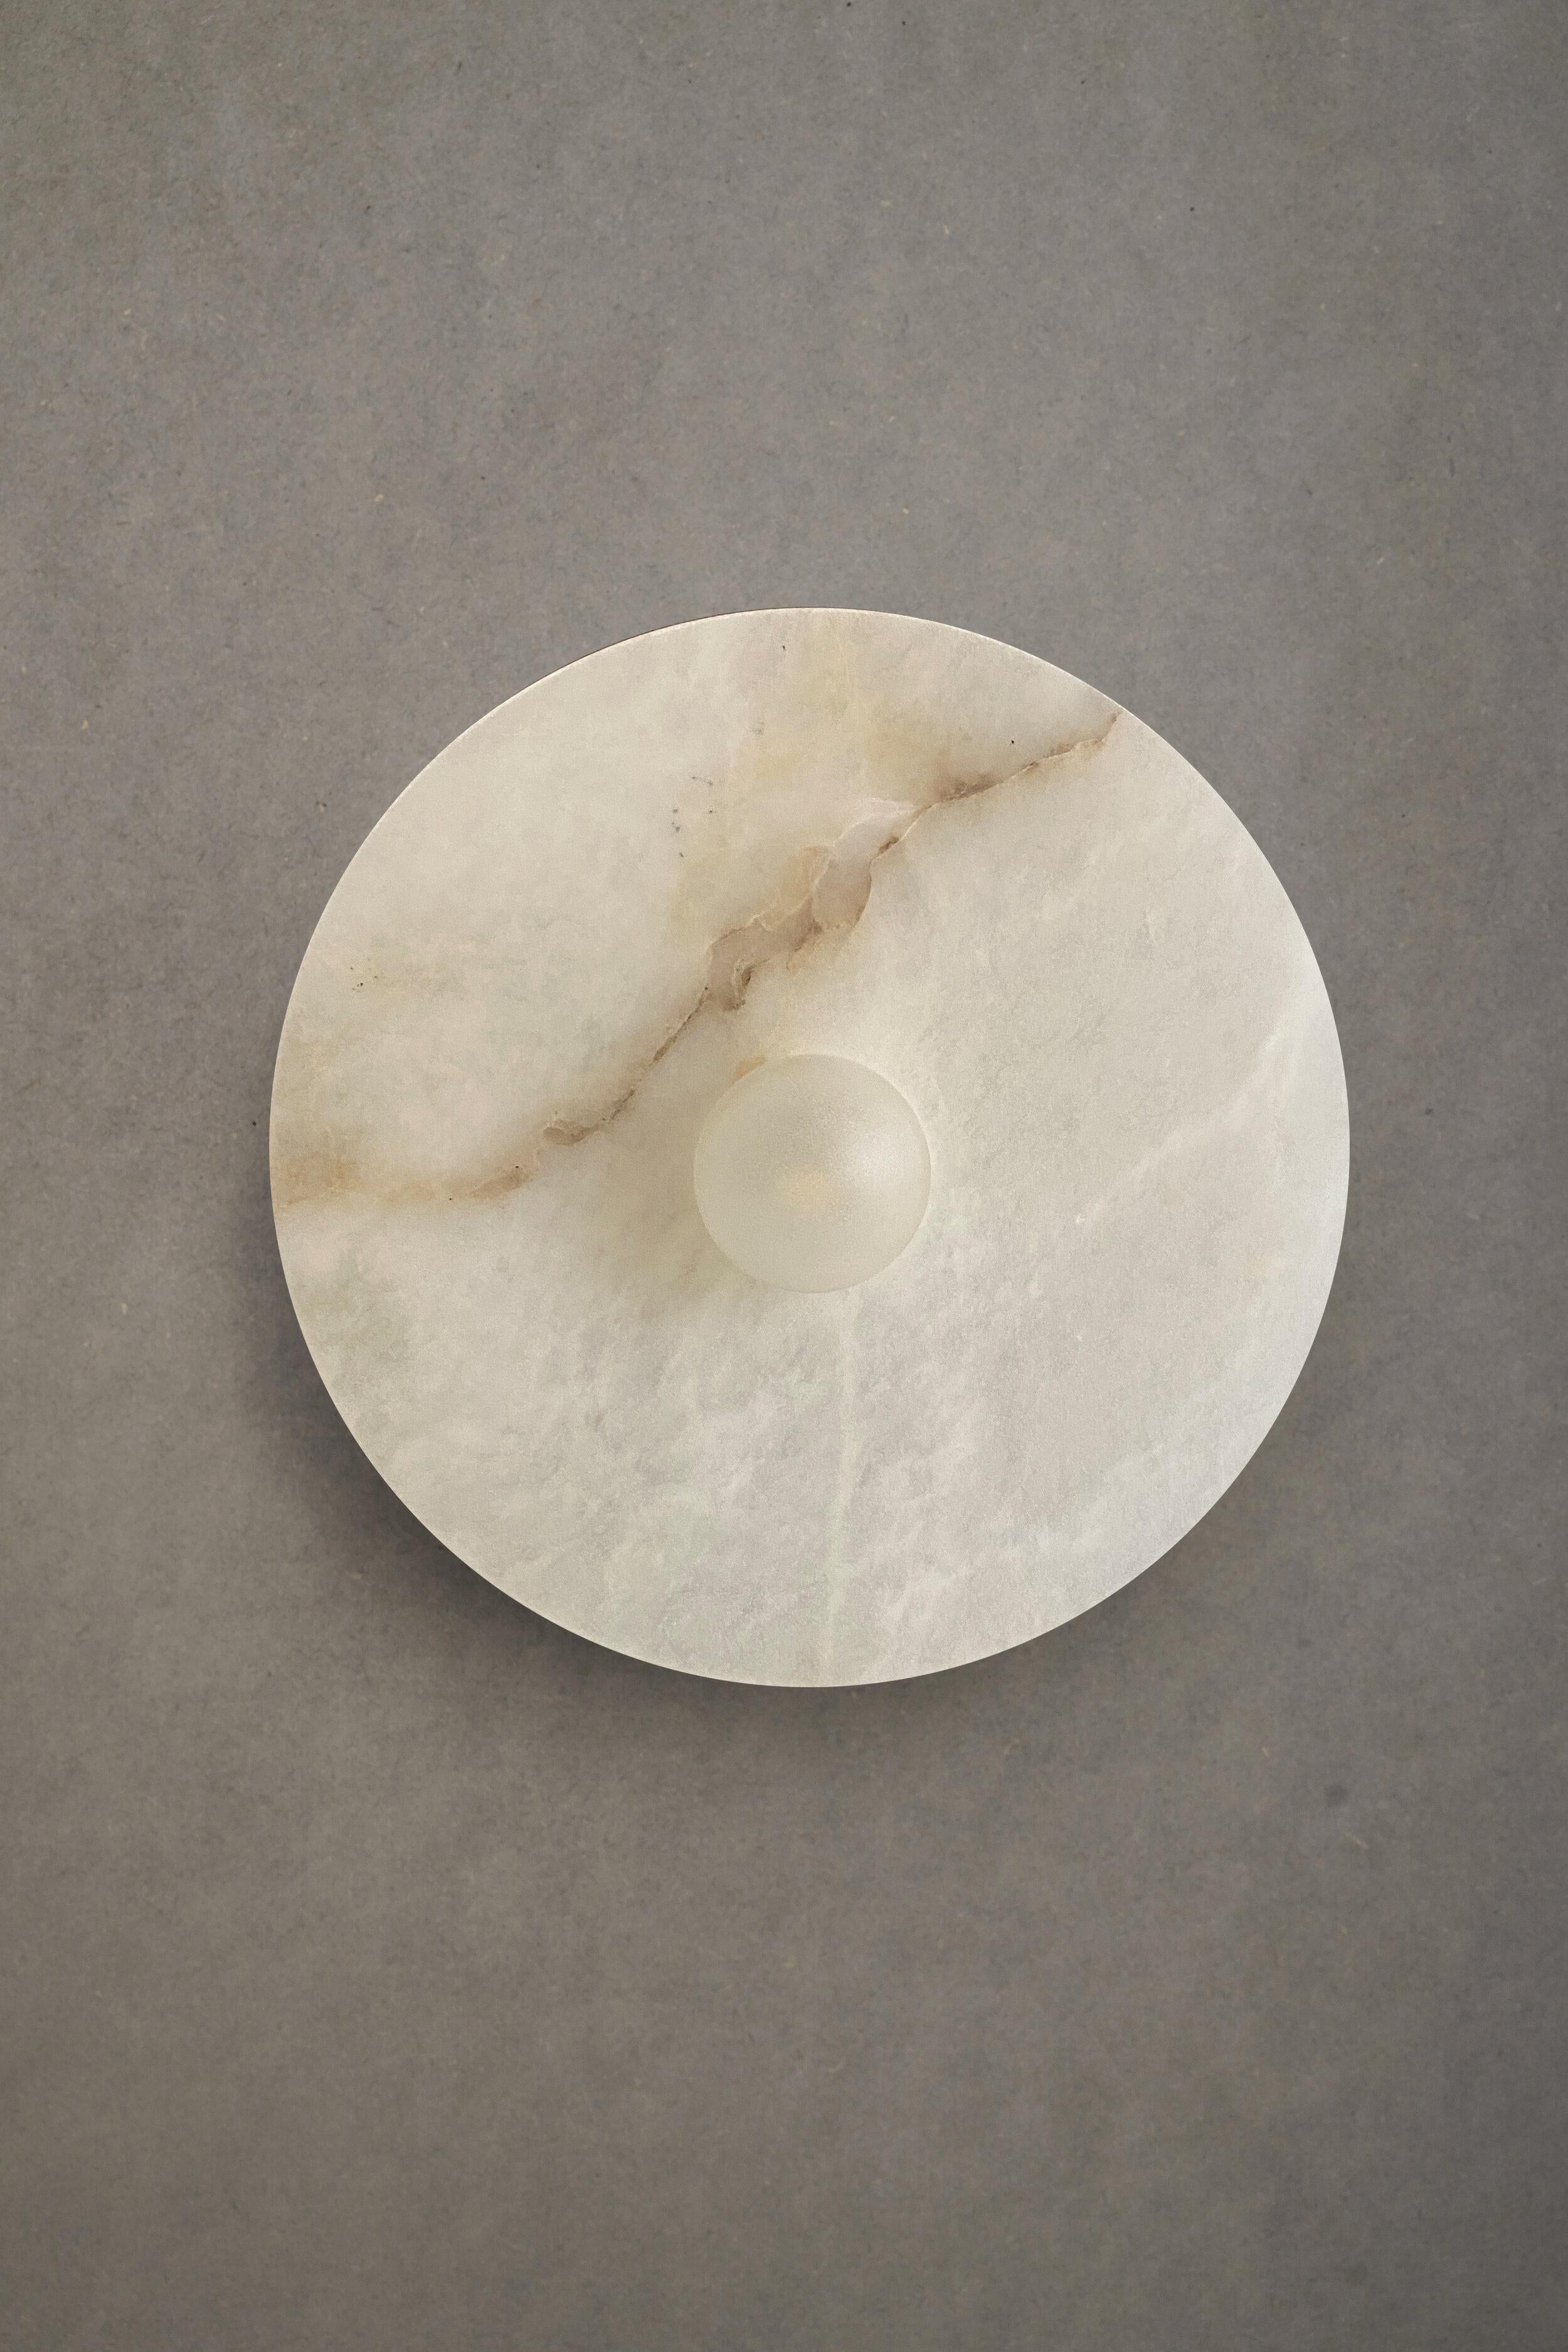 Alba simple wall XXL Aalabaster light by Contain
Dimensions: D28 x H9.5 cm
Materials: Alabaster structure and optical lens

All our lamps can be wired according to each country. If sold to the USA it will be wired for the USA for